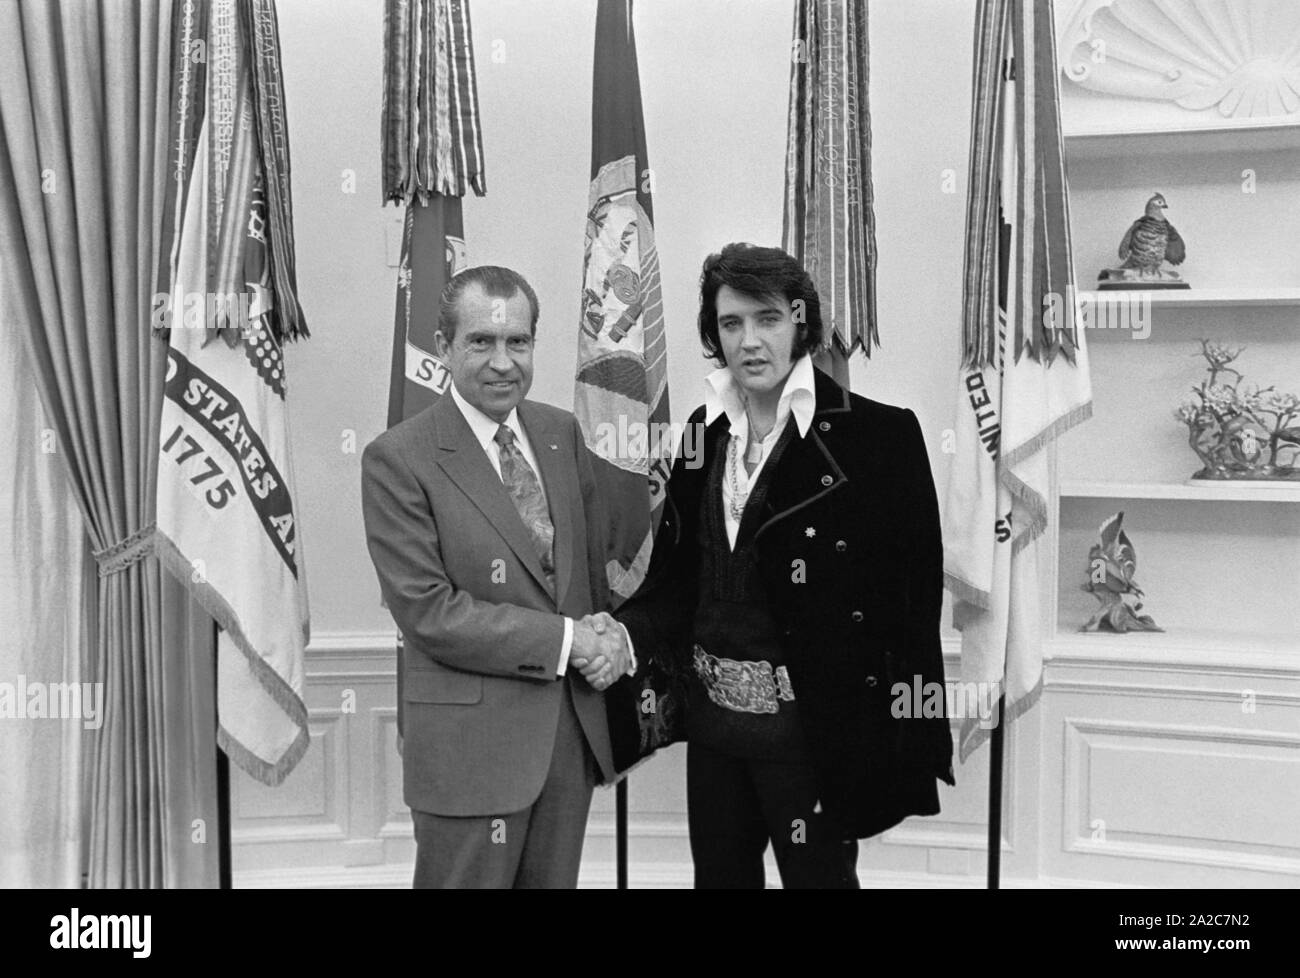 President Richard M. Nixon and Elvis Presley shaking hands in the White House, Washington, District of Columbia, 1970. Image courtesy National Archives. () Stock Photo